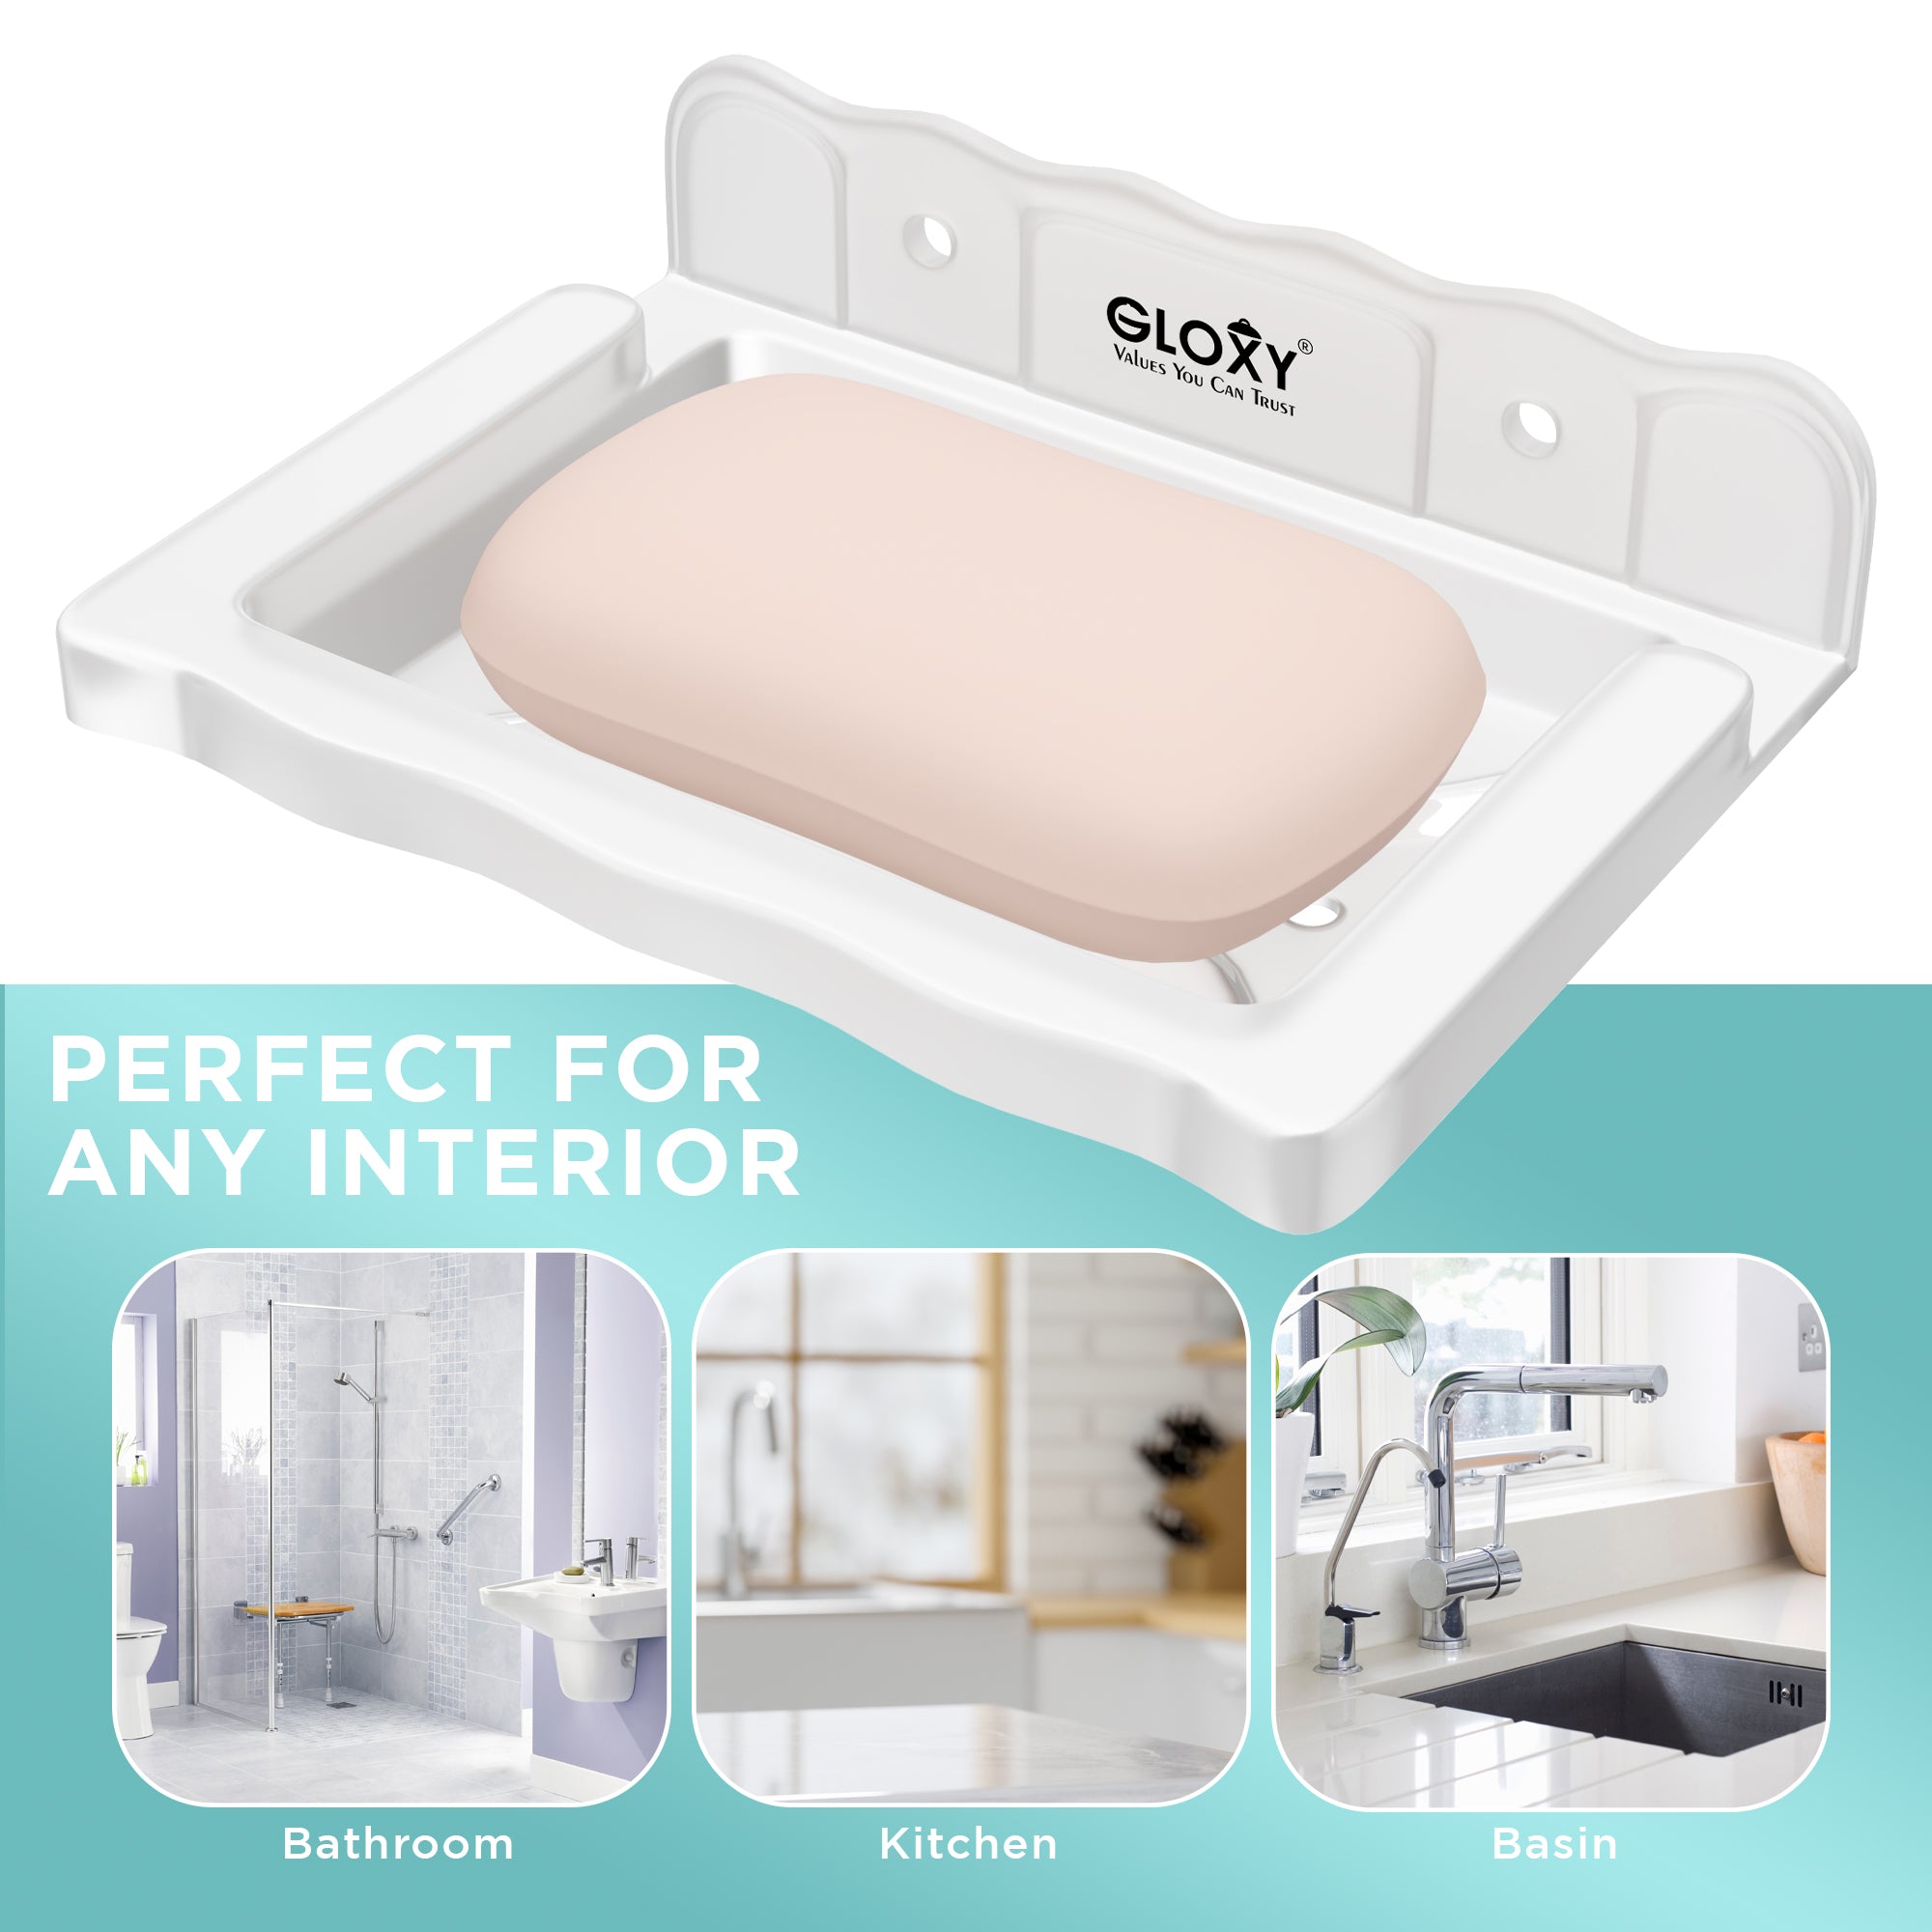 GLOXY® Unbreakable Transparent Wall Mount Soap Dish